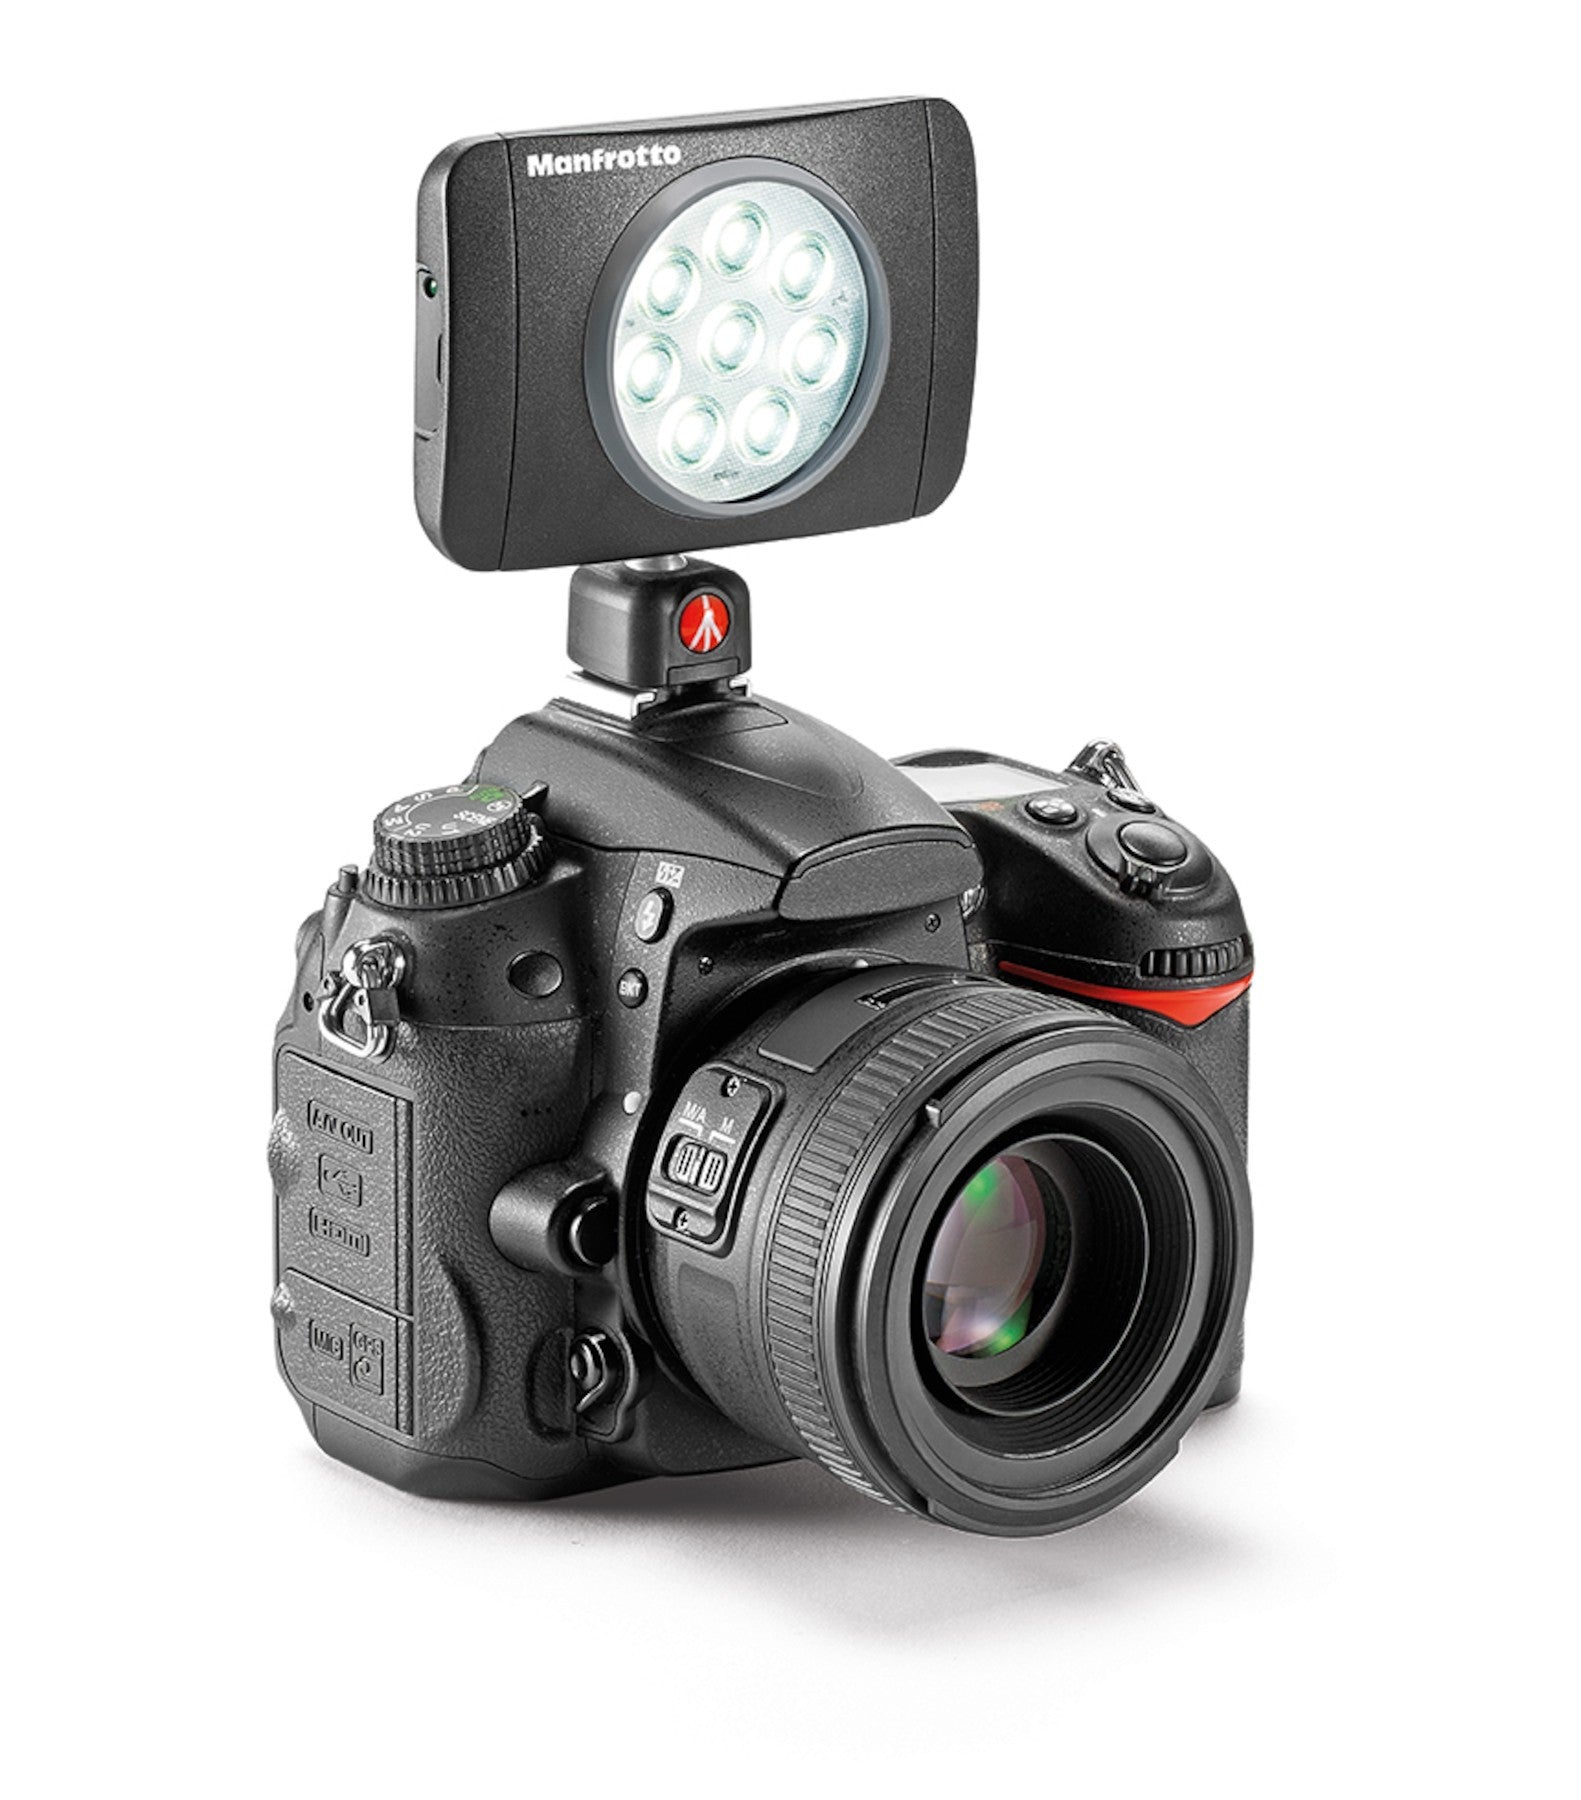 Manfrotto Lumie Series Muse LED Light, lighting led lights, Manfrotto - Pictureline  - 4